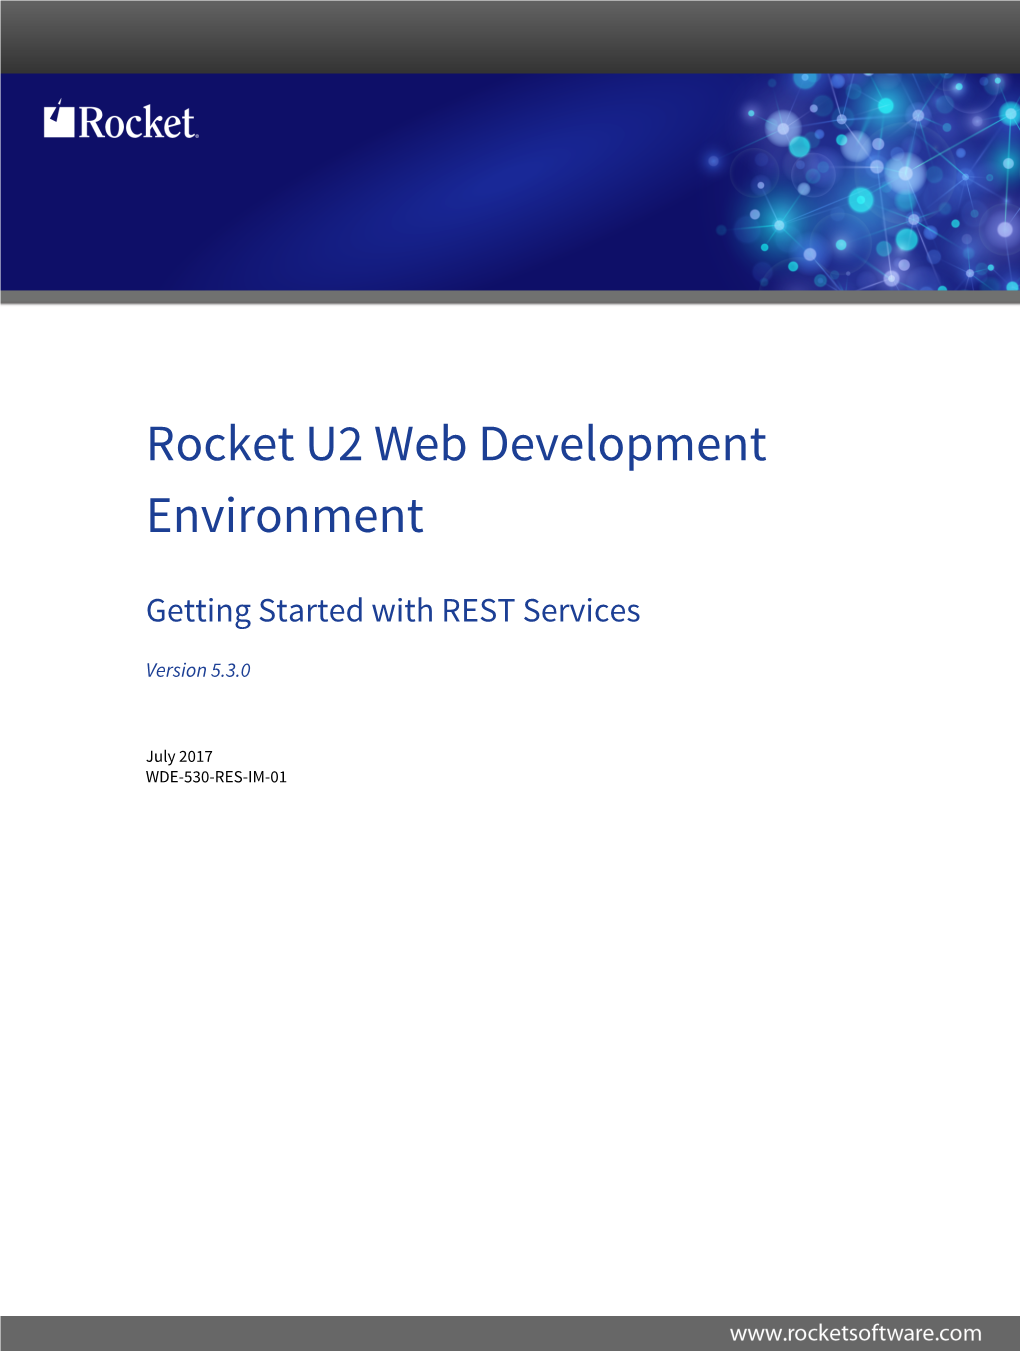 Rocket U2 Web Development Environment Getting Started with REST Services